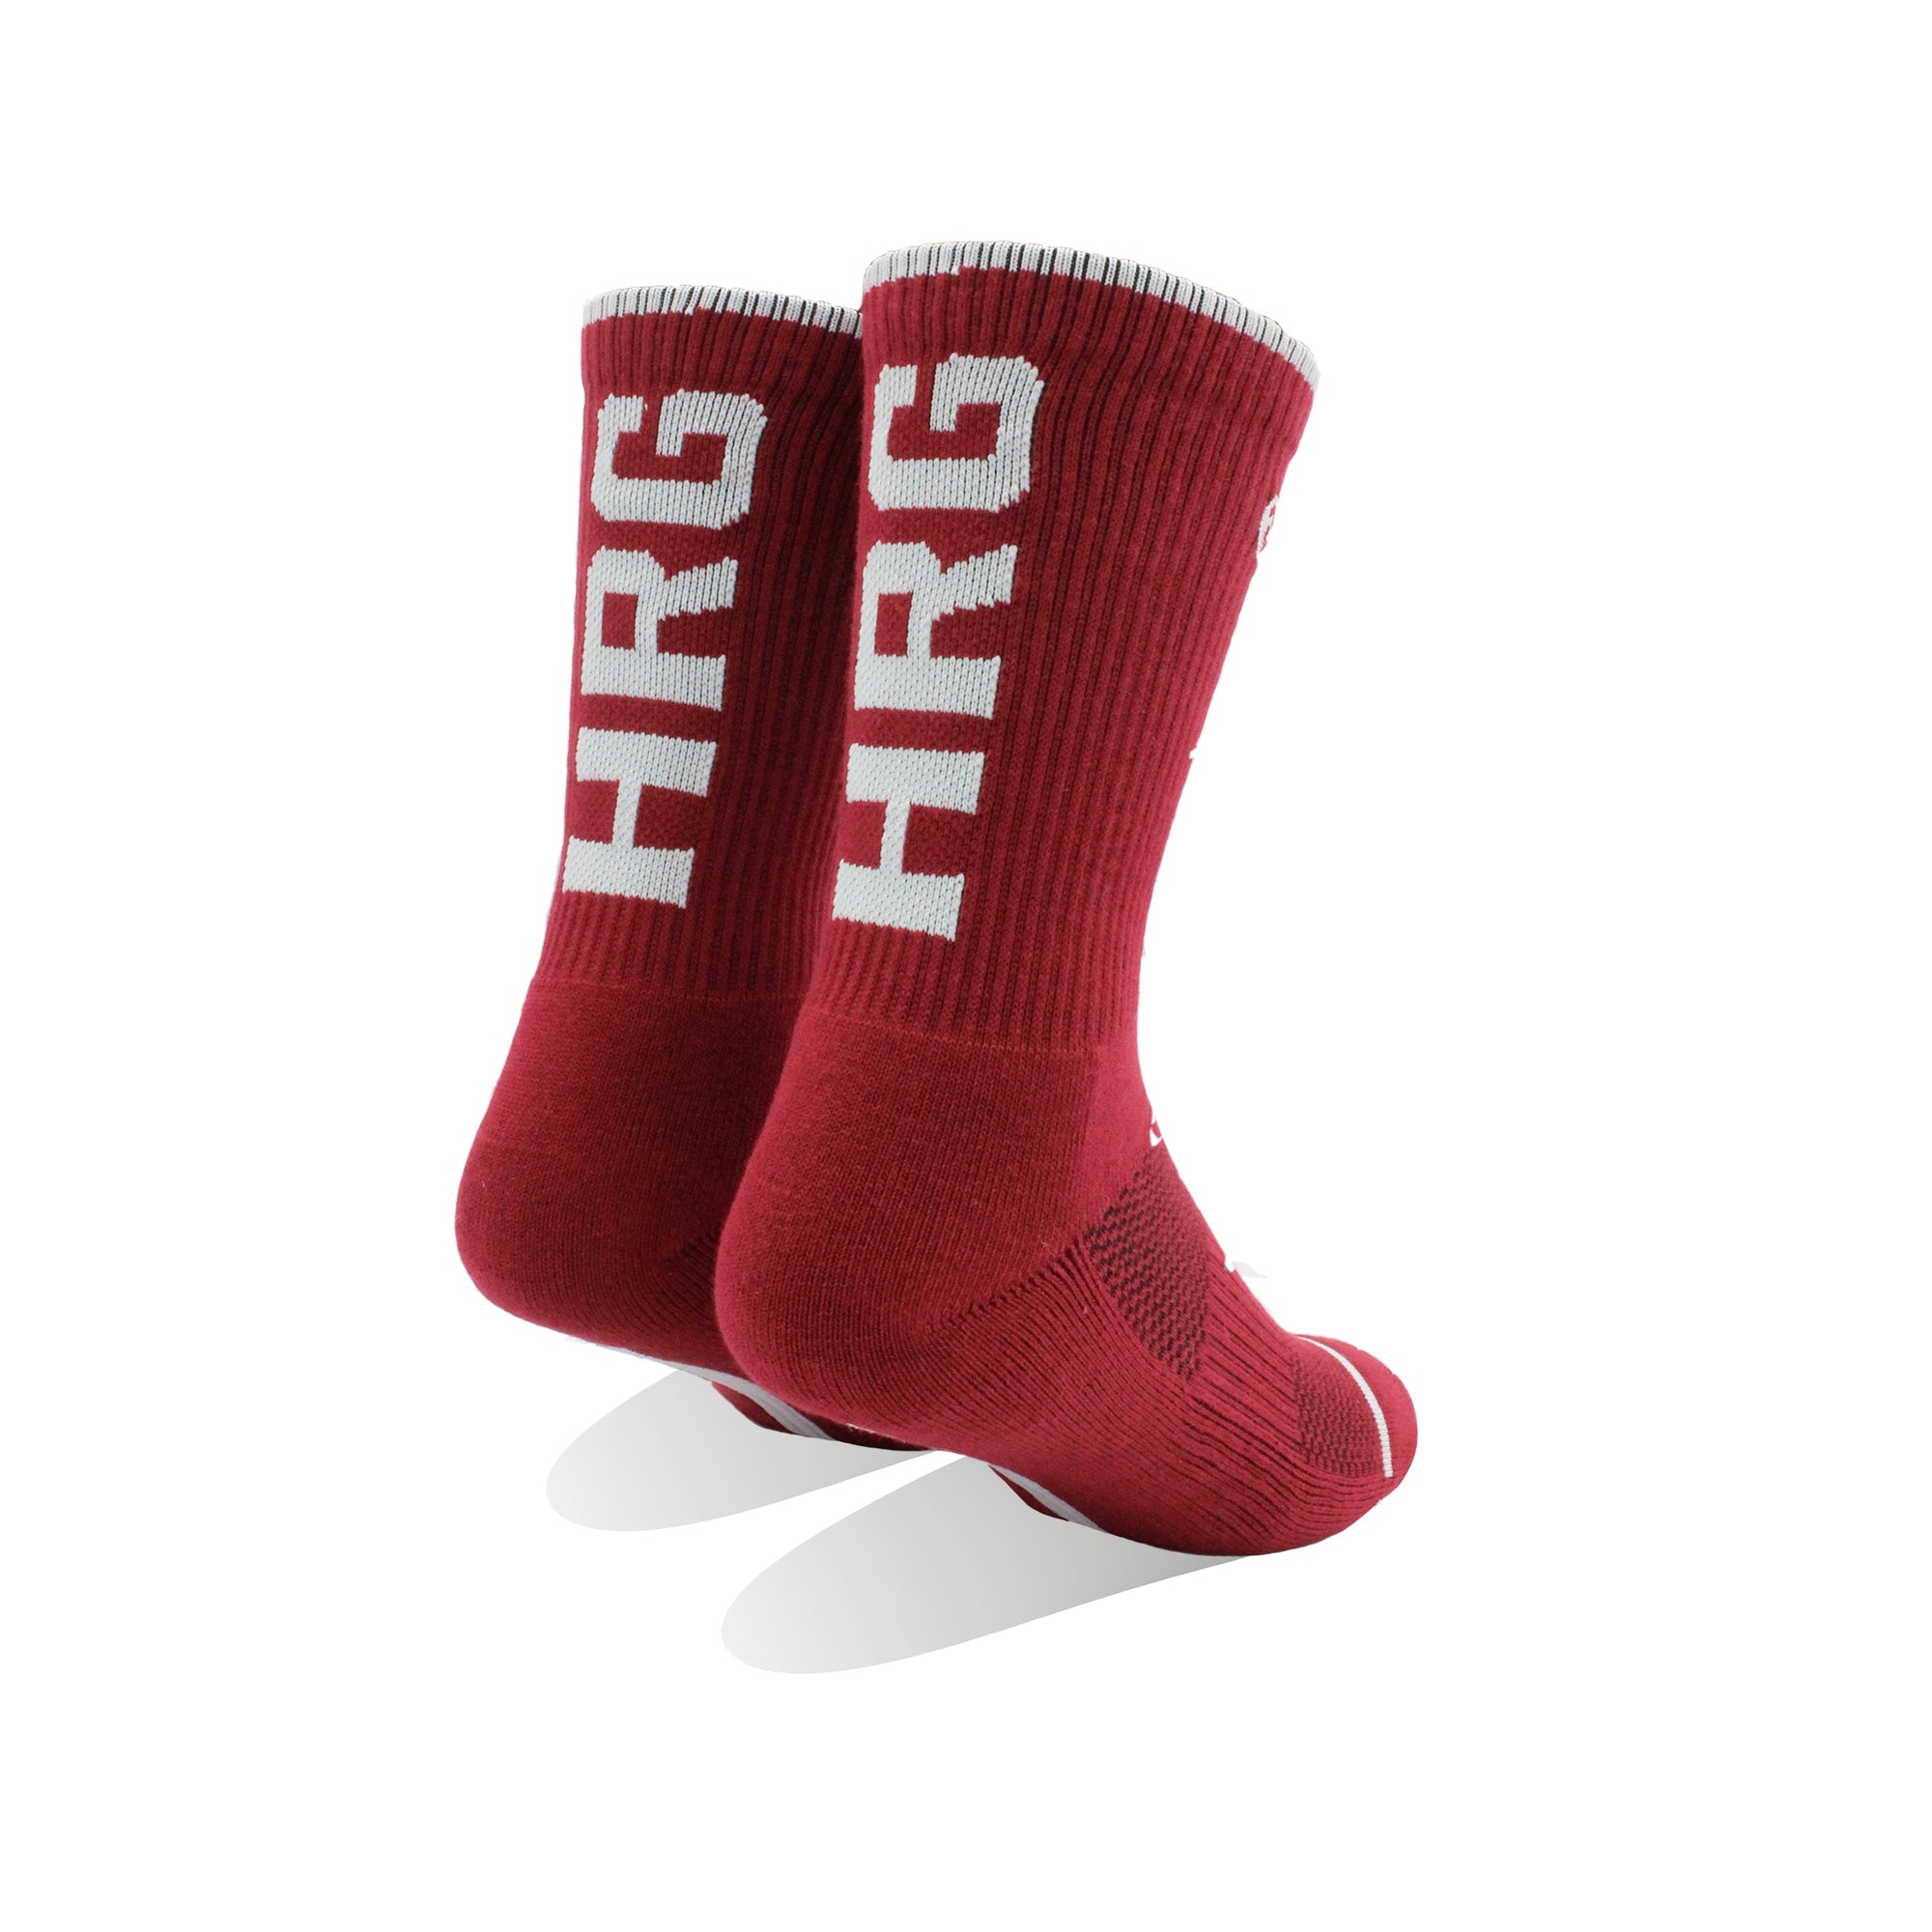 HRG Bali Red Classic Crew Sock Size Small - FACTORY SECONDS